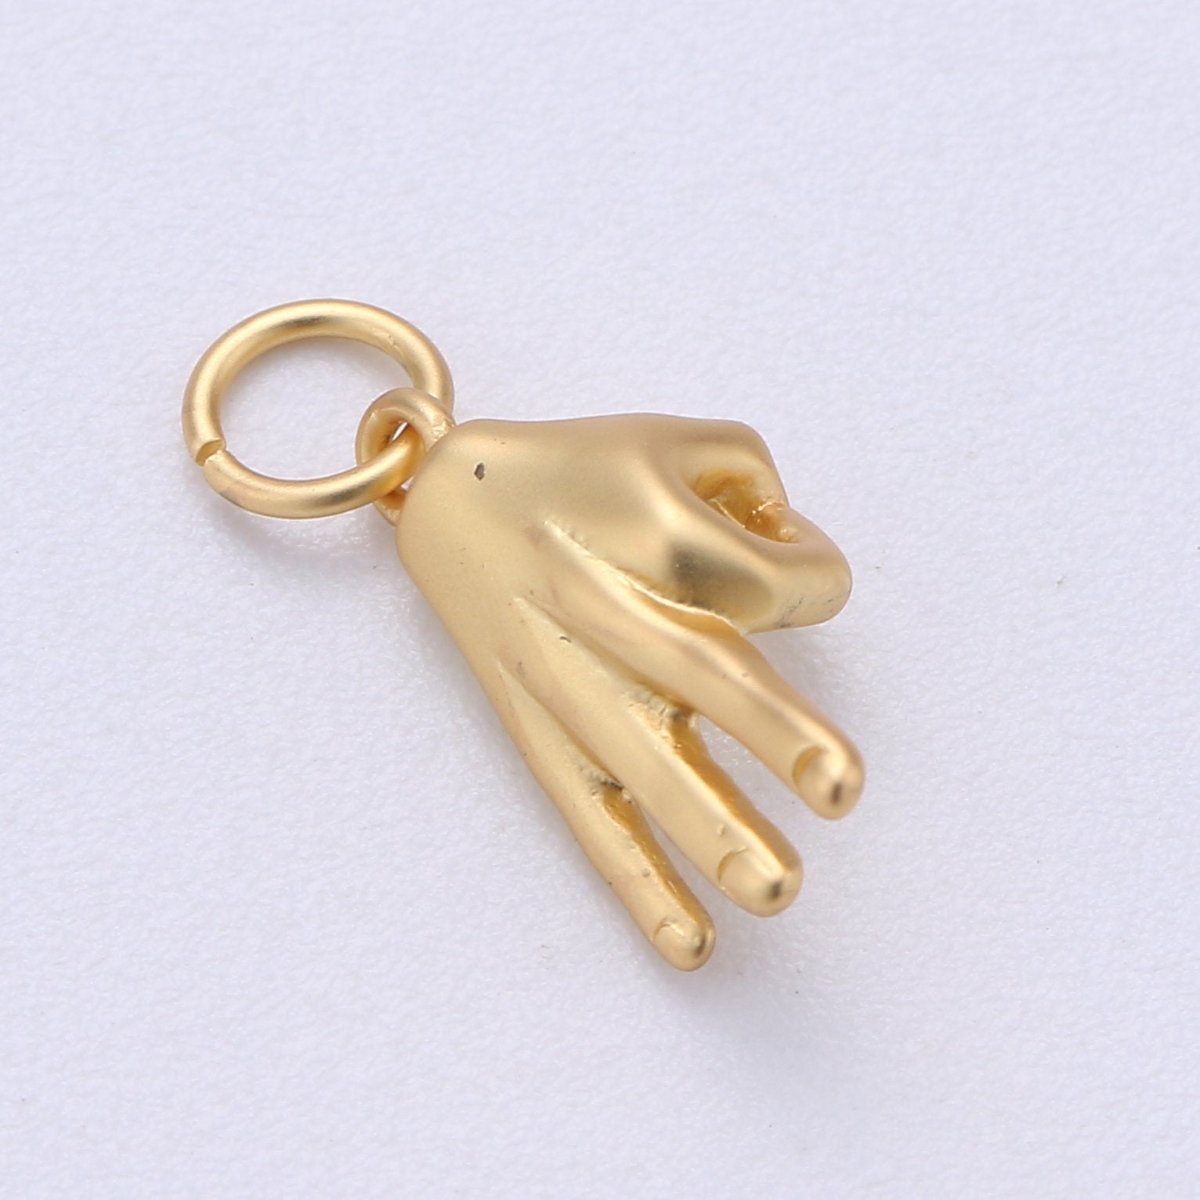 Dainty "Okay" hand Pendant in Gold Filled Ok Gesture Charm, Jewelry Supplies, Jewelry Making Earring Bracelet Necklace Charm, C-405 - DLUXCA